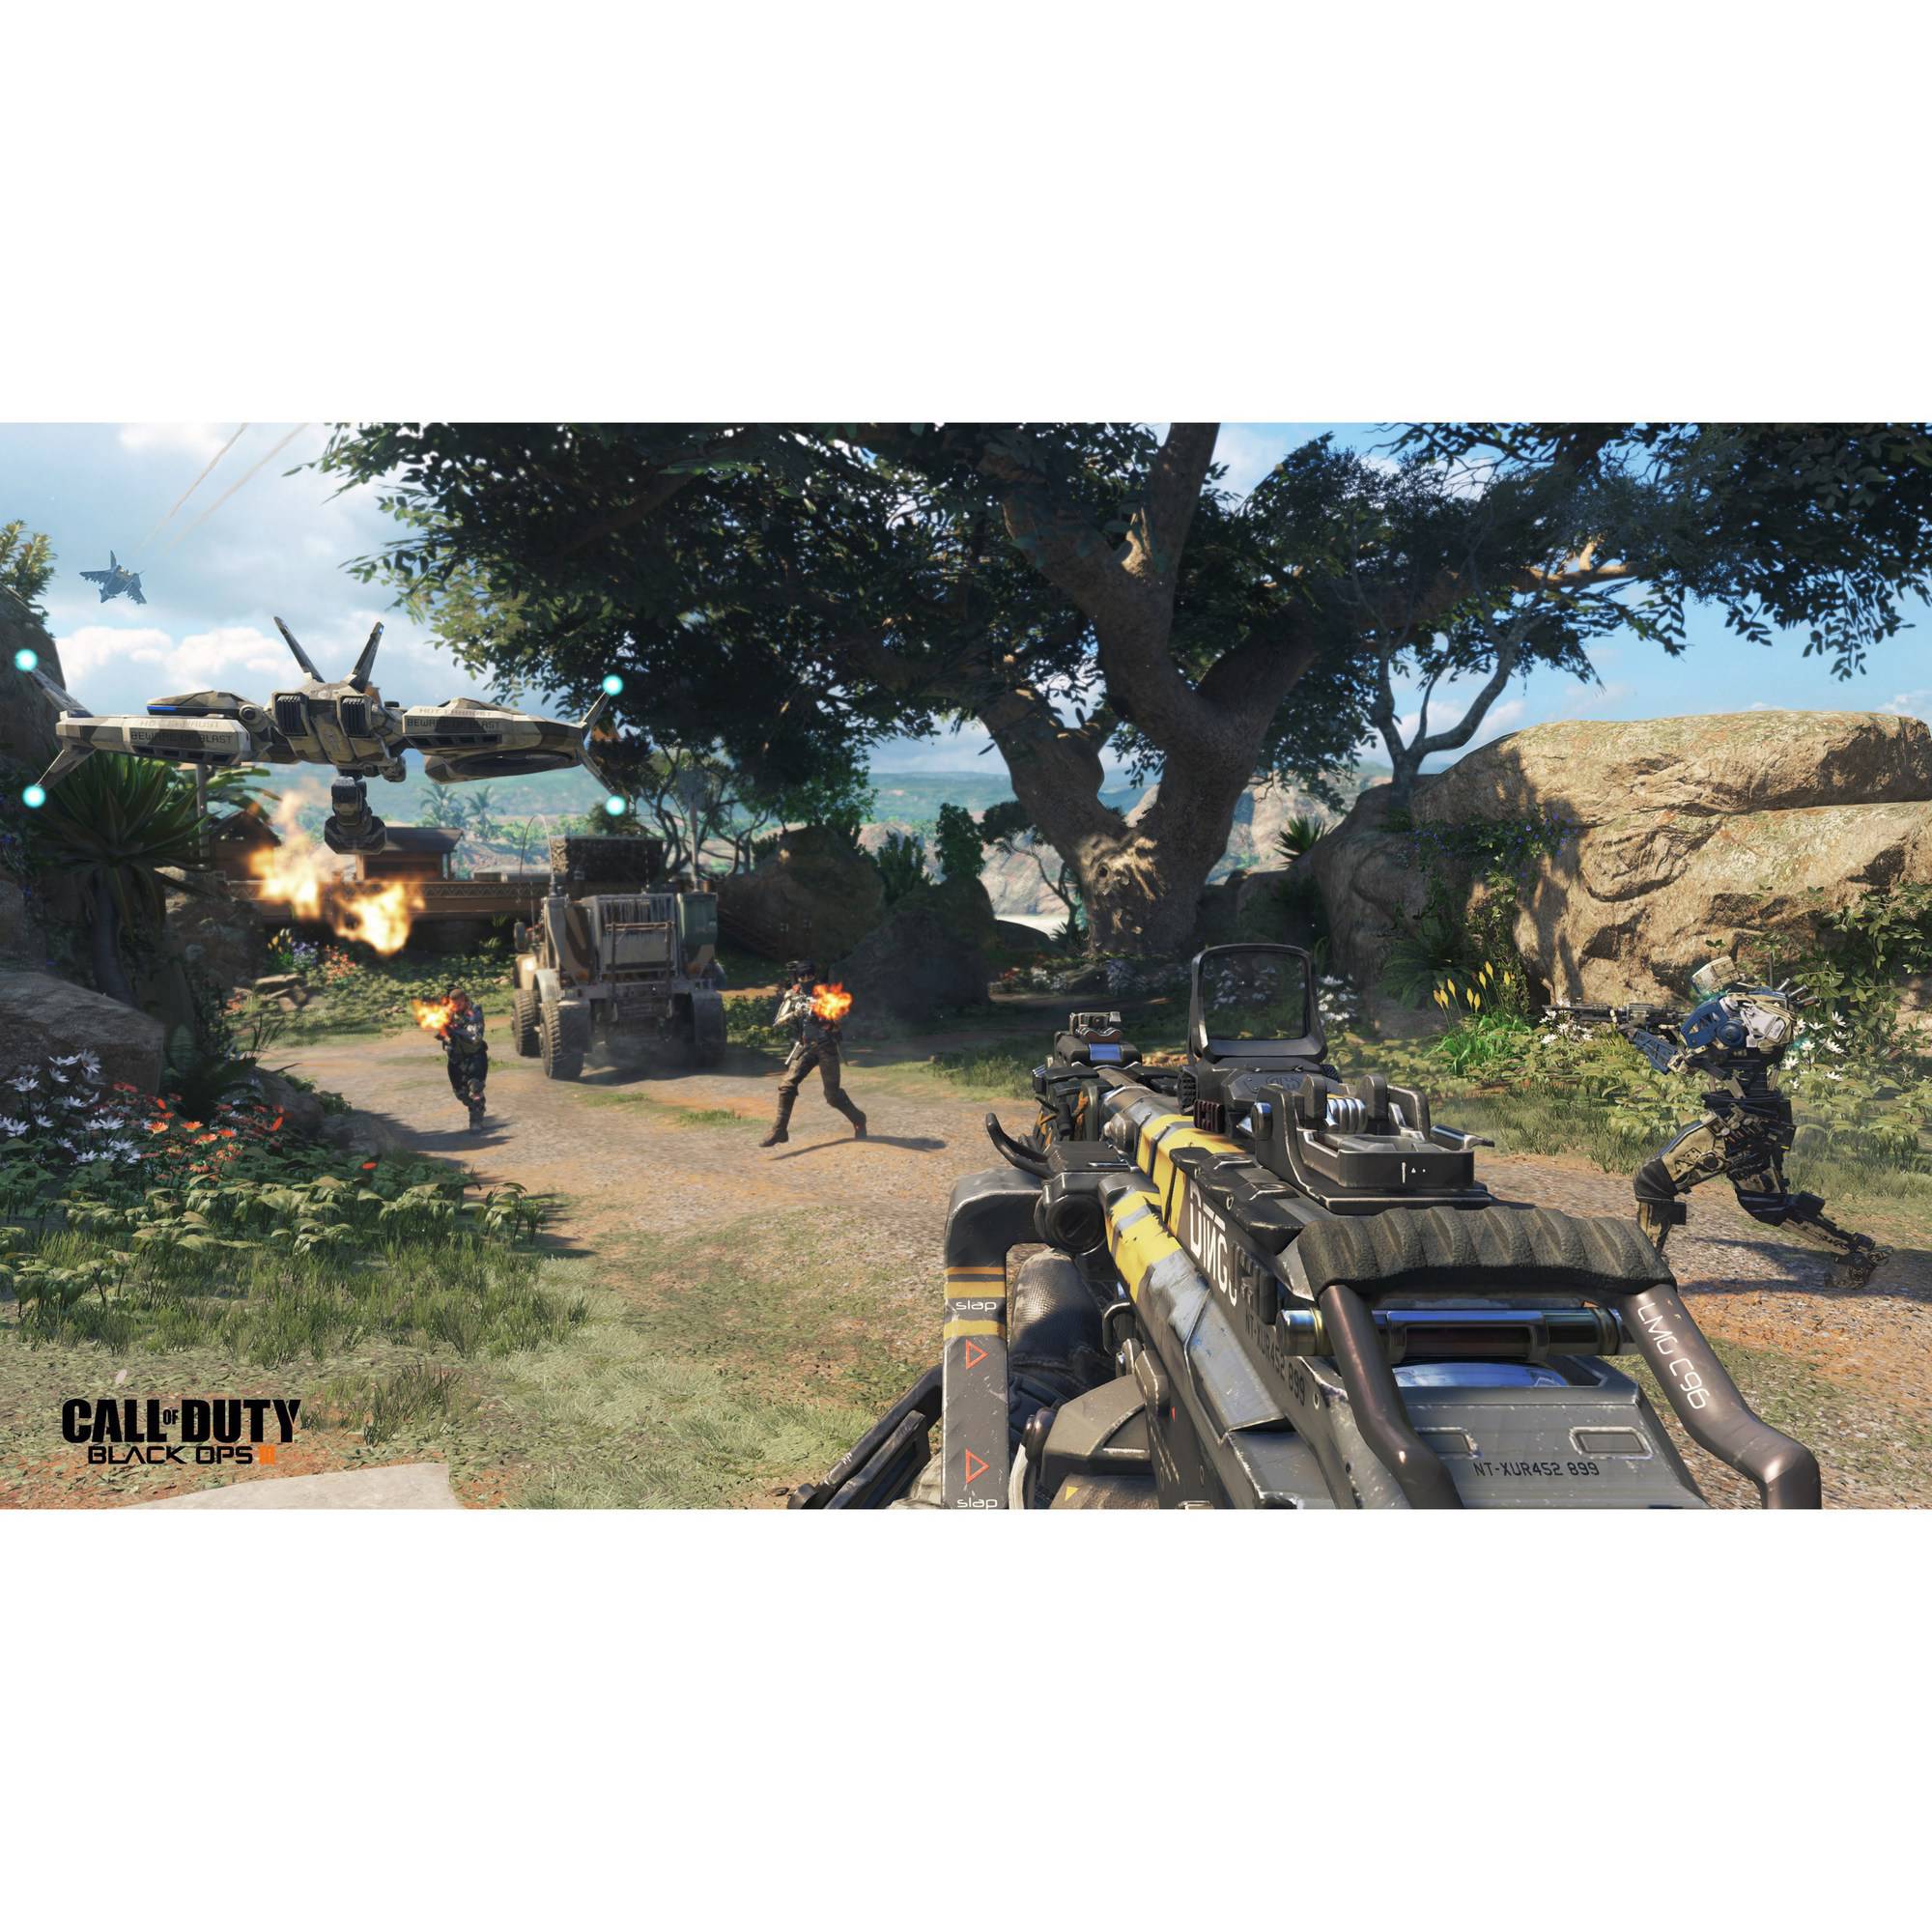 Call Of Duty Black Ops 3 (Xbox 360) - Pre-Owned Activision - image 1 of 5